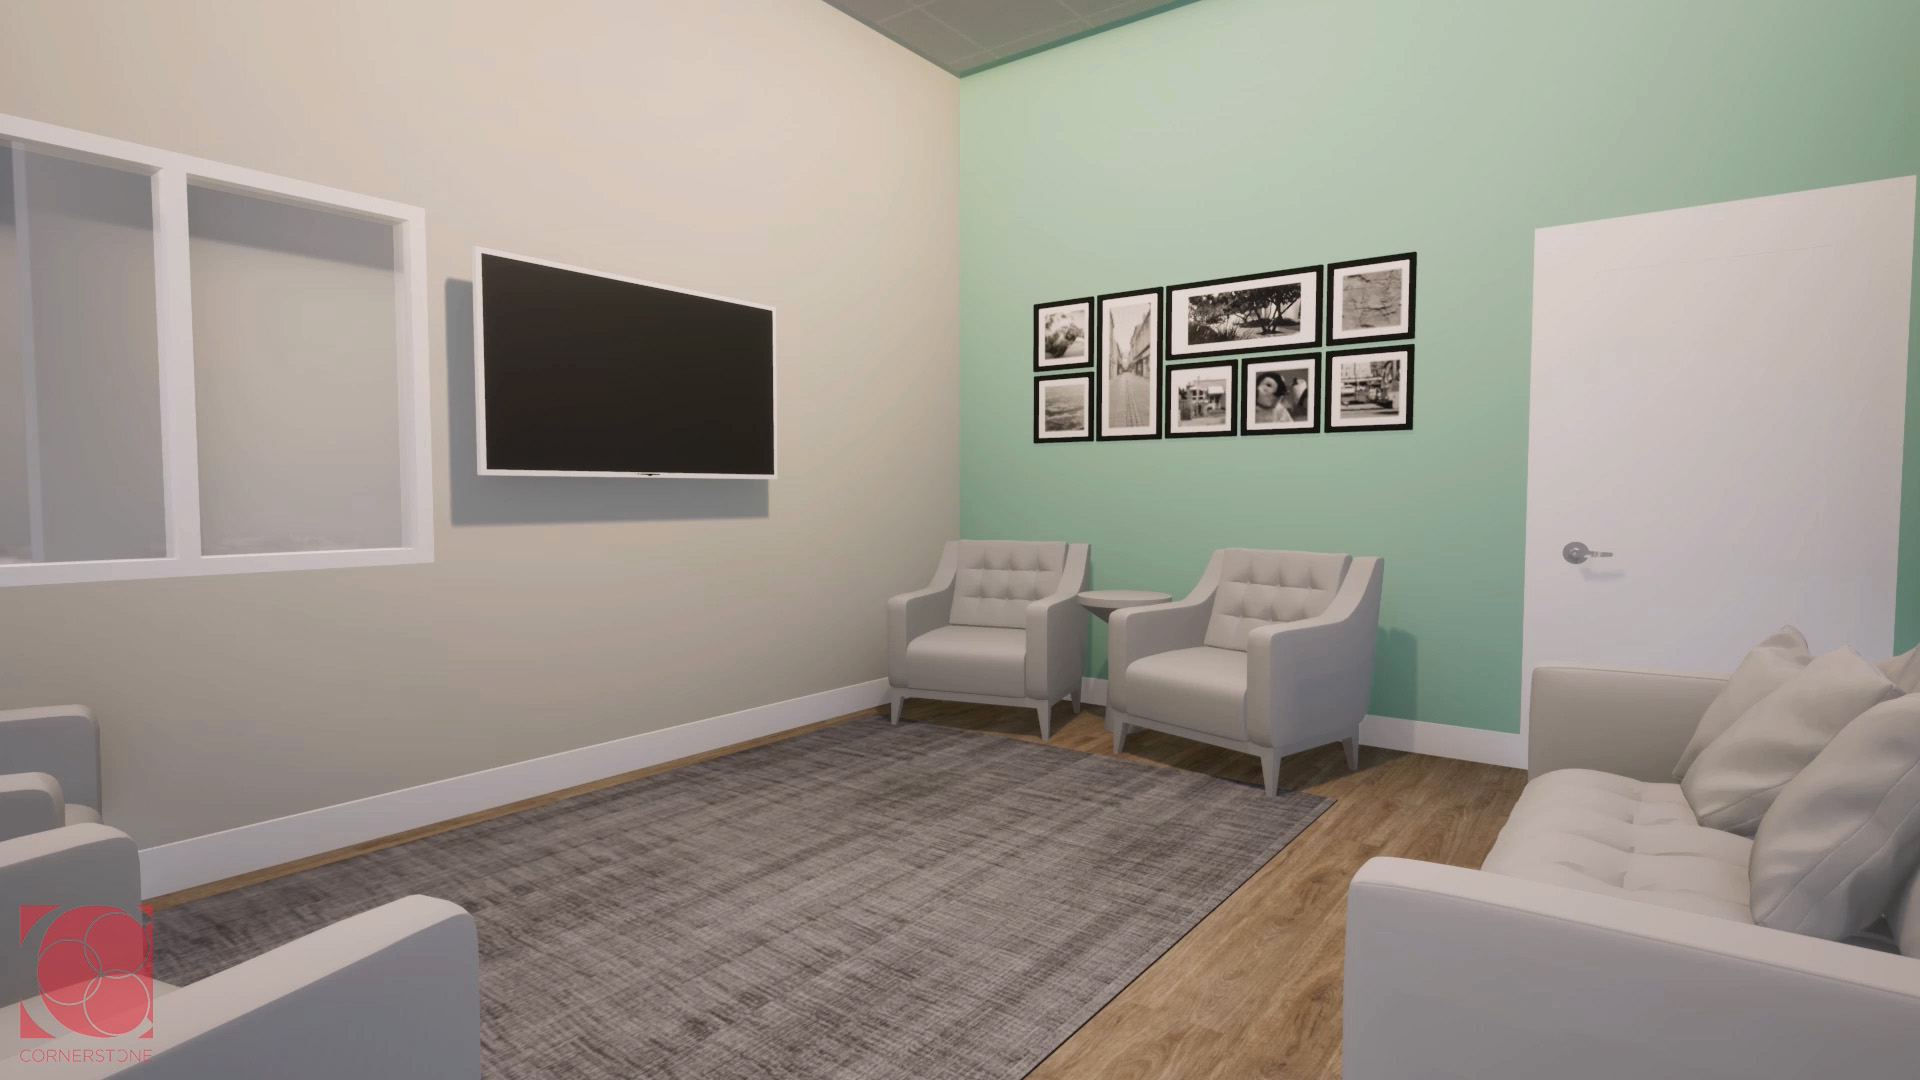 Artists rendering of new tv room area with one white and one mint colored wall.